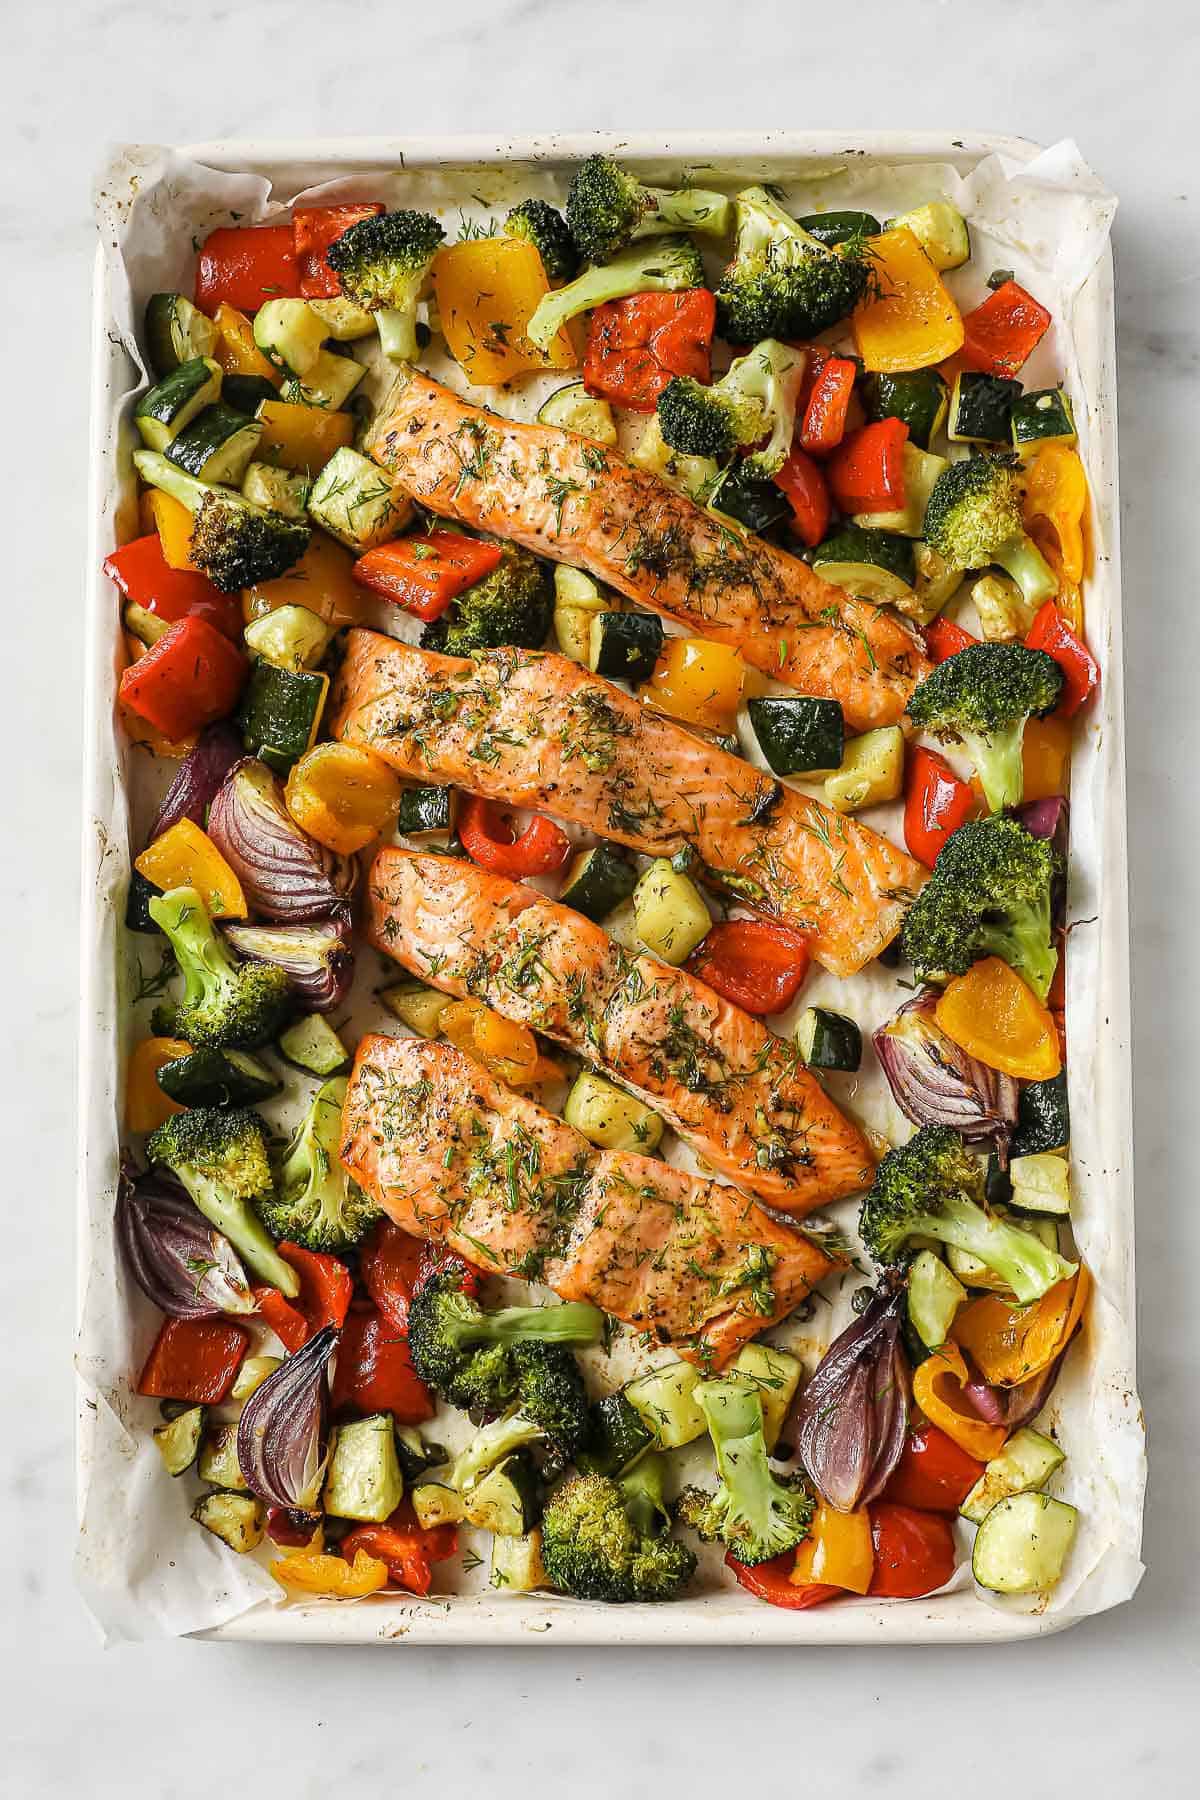 A sheet pan meal with salmon, zucchini, broccoli, red onion, peppers, capers, garlic, olive oil and spices.